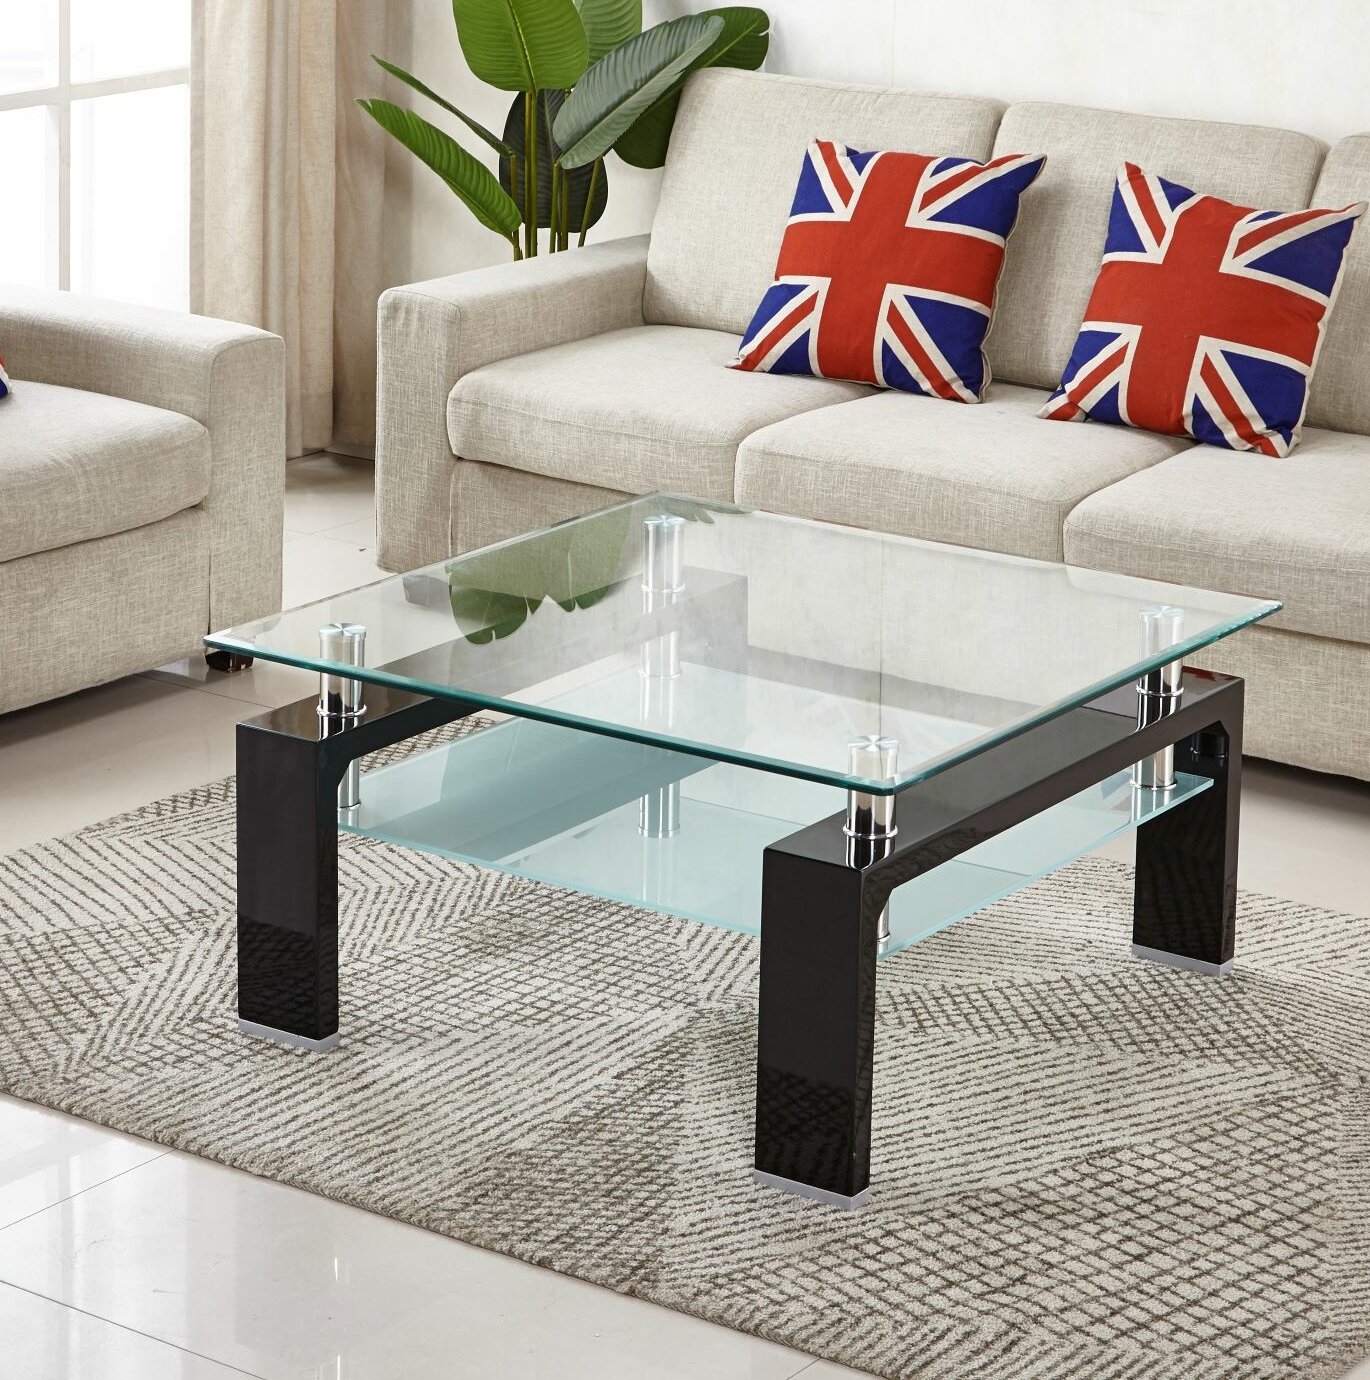 Hentschel Sled Coffee Table with Storage